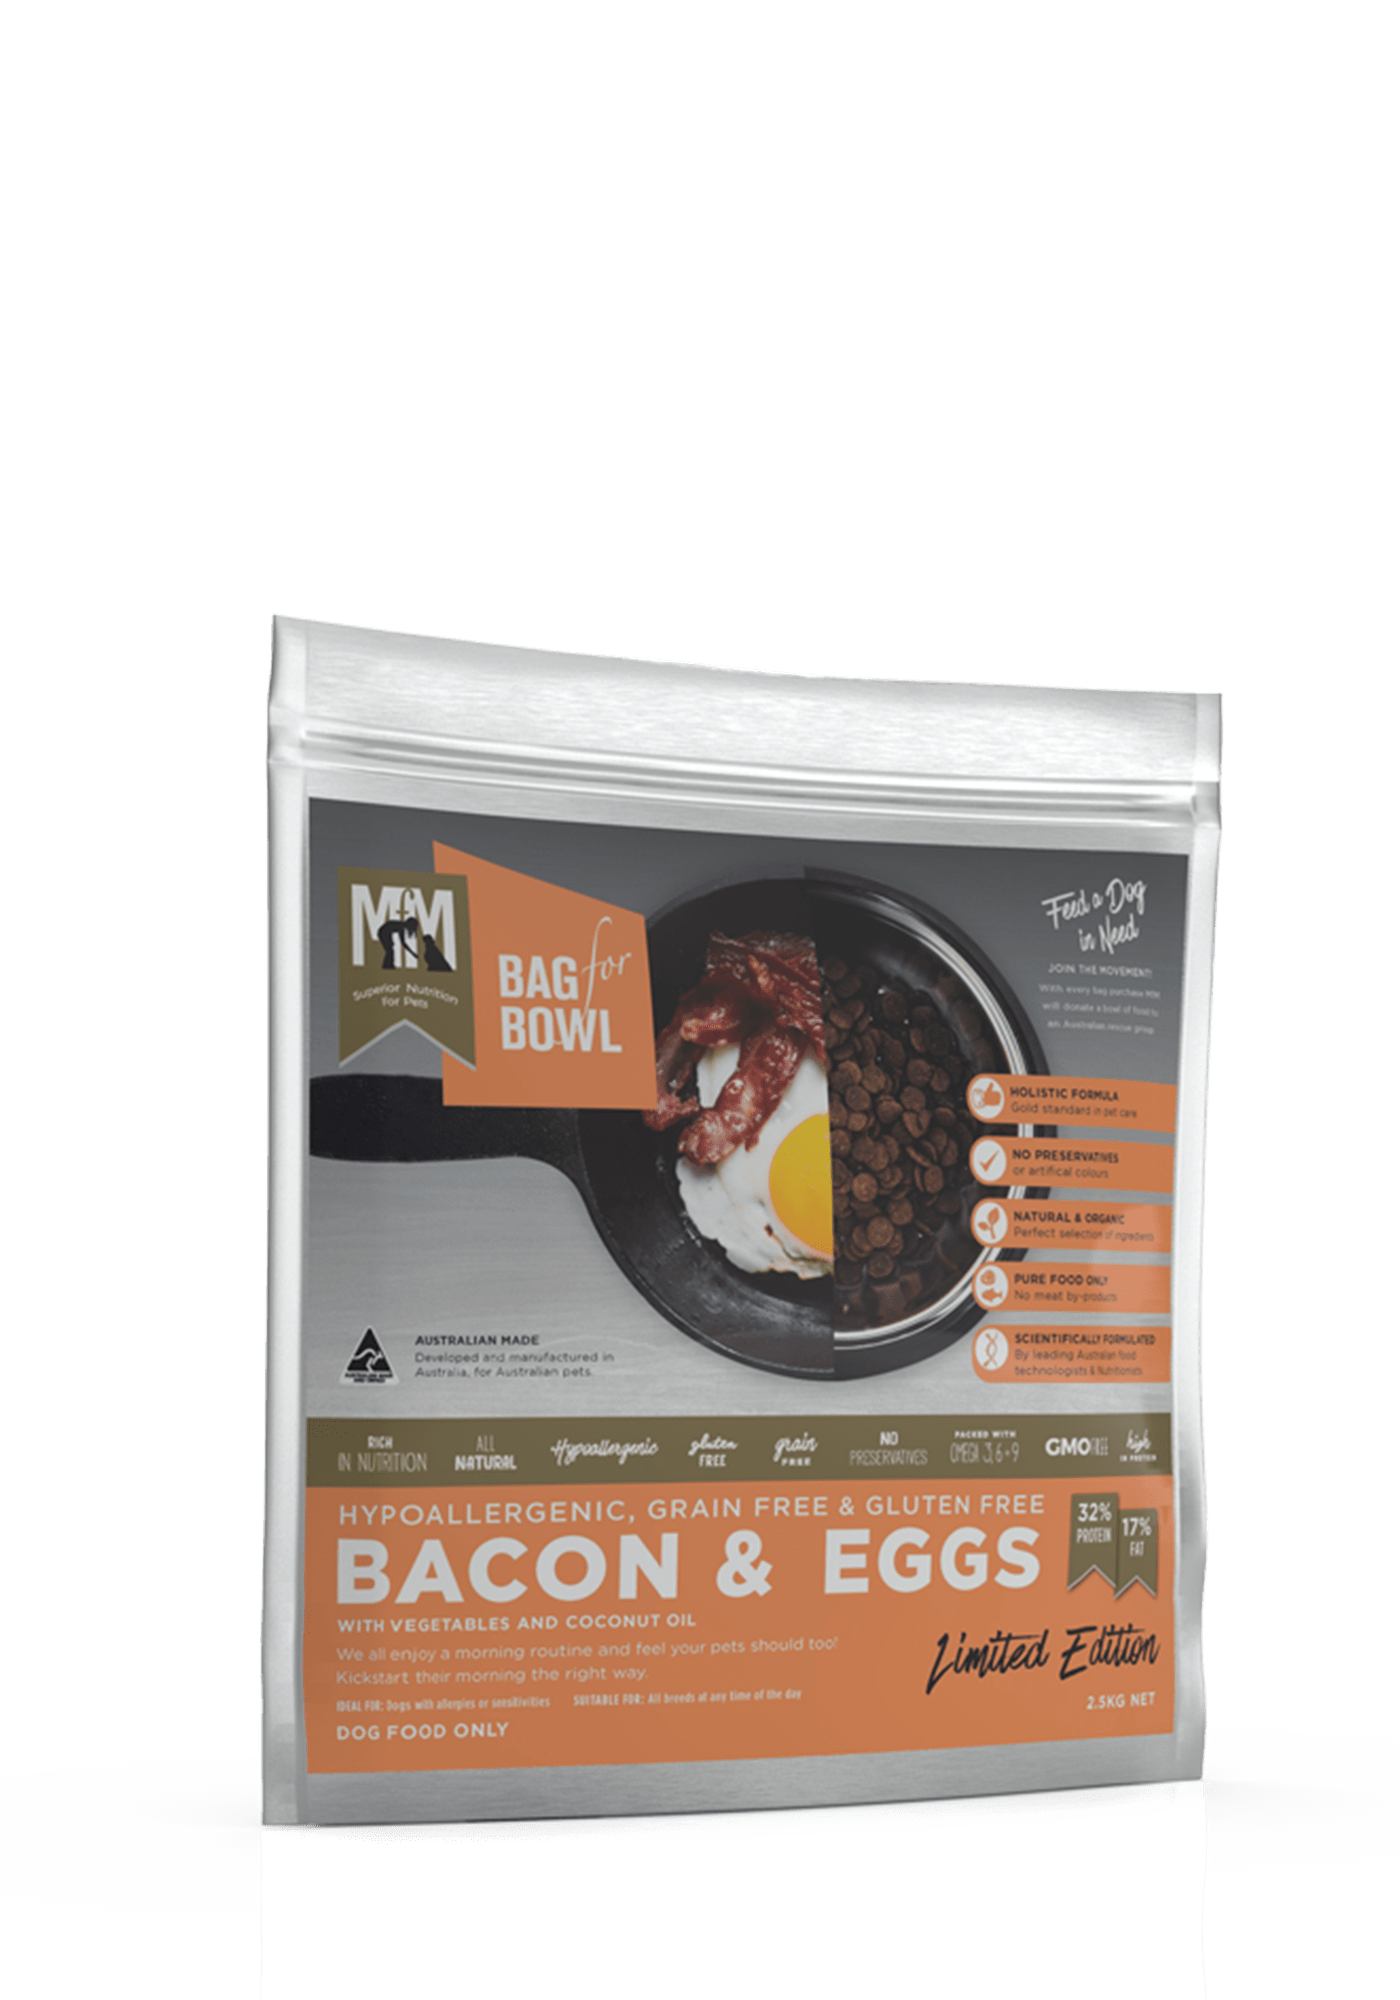 Bacon & Eggs- Meals For Mutts Australia